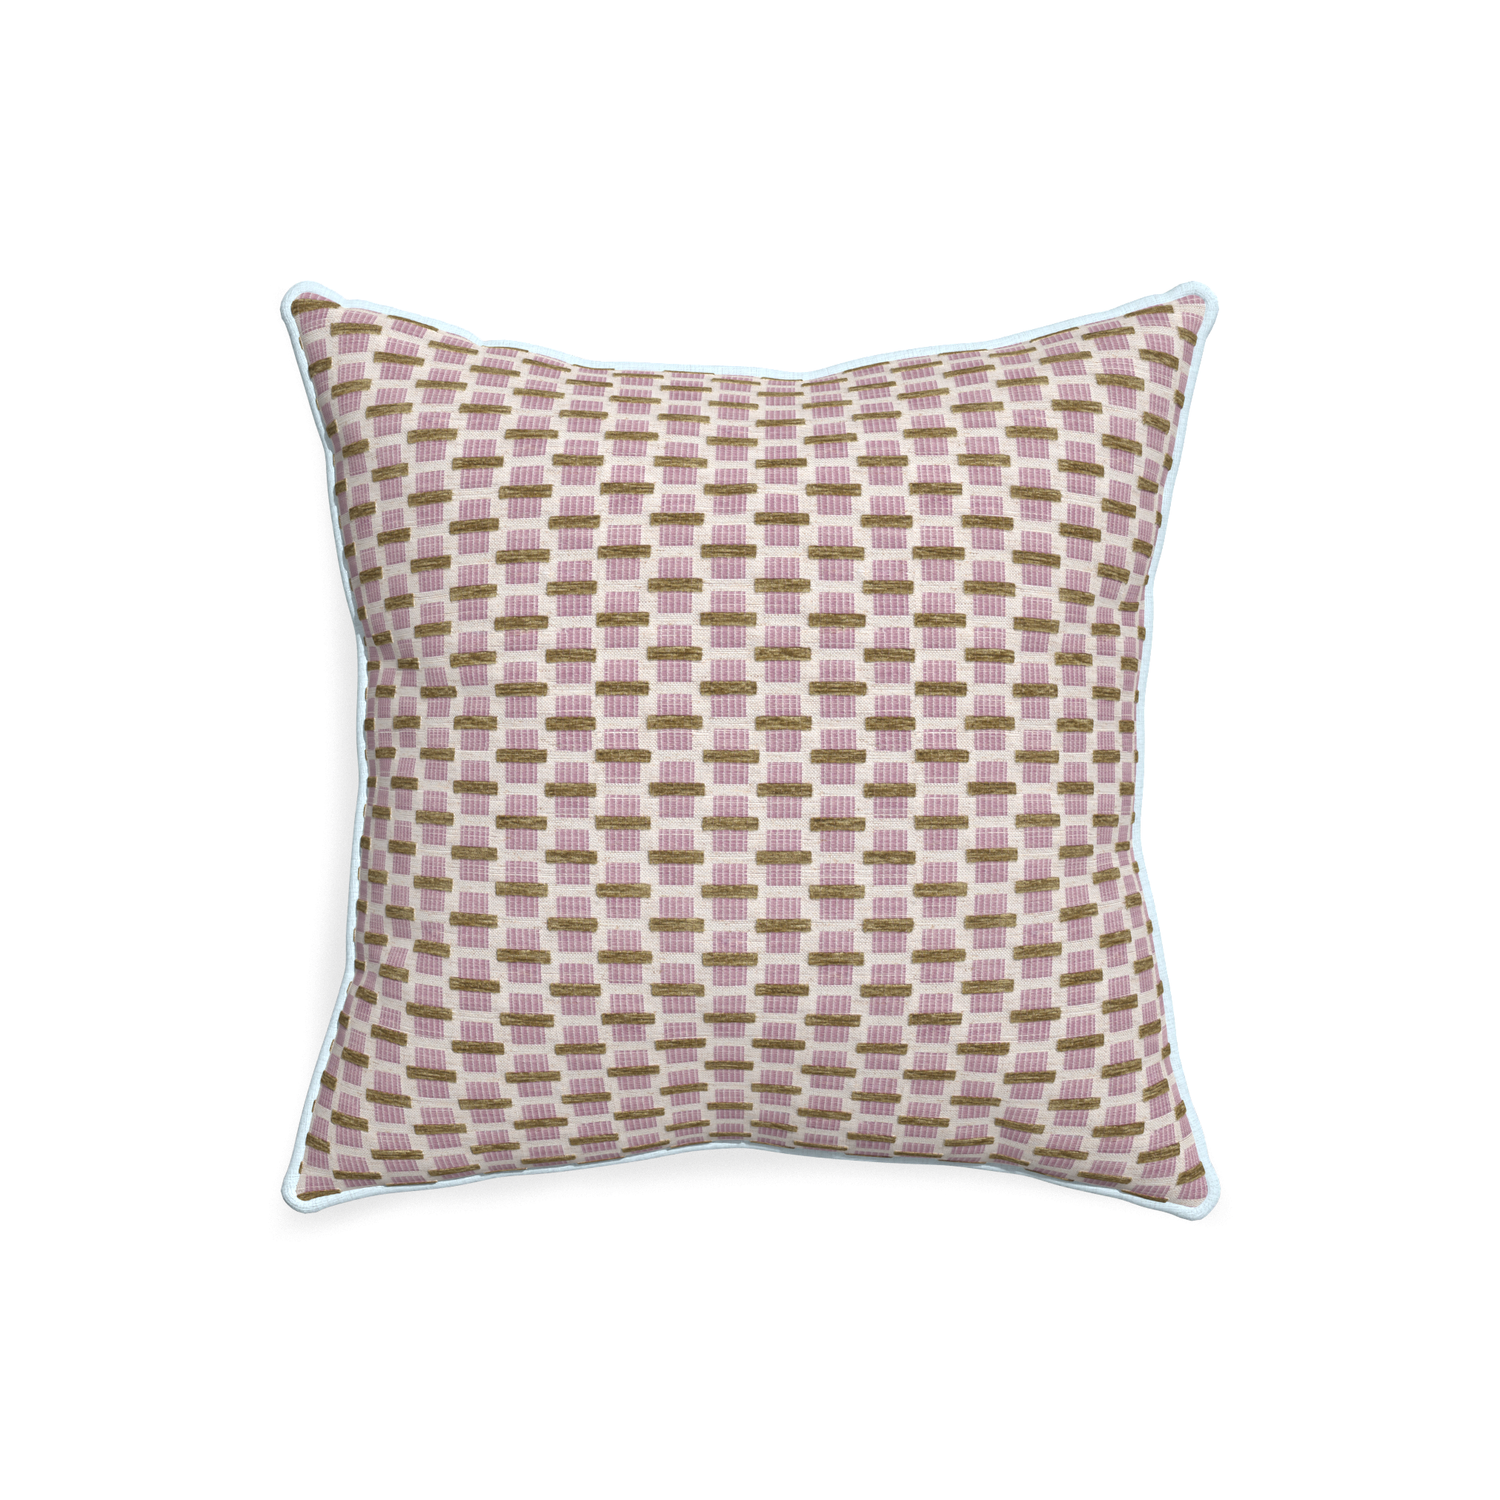 20-square willow orchid custom pink geometric chenillepillow with powder piping on white background